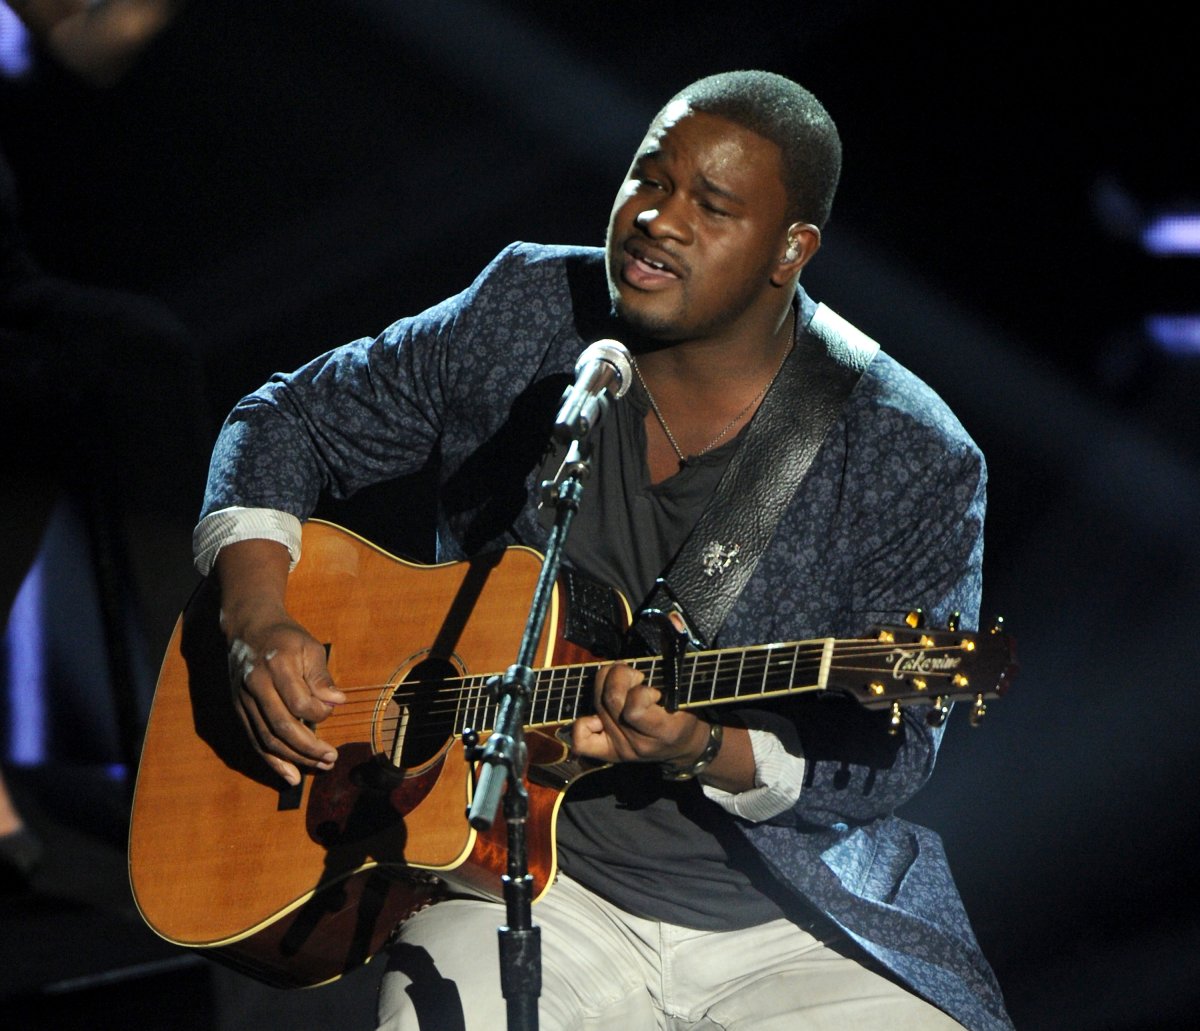 C.J. Harris on stage with a guitar. He is singing into a microphone.